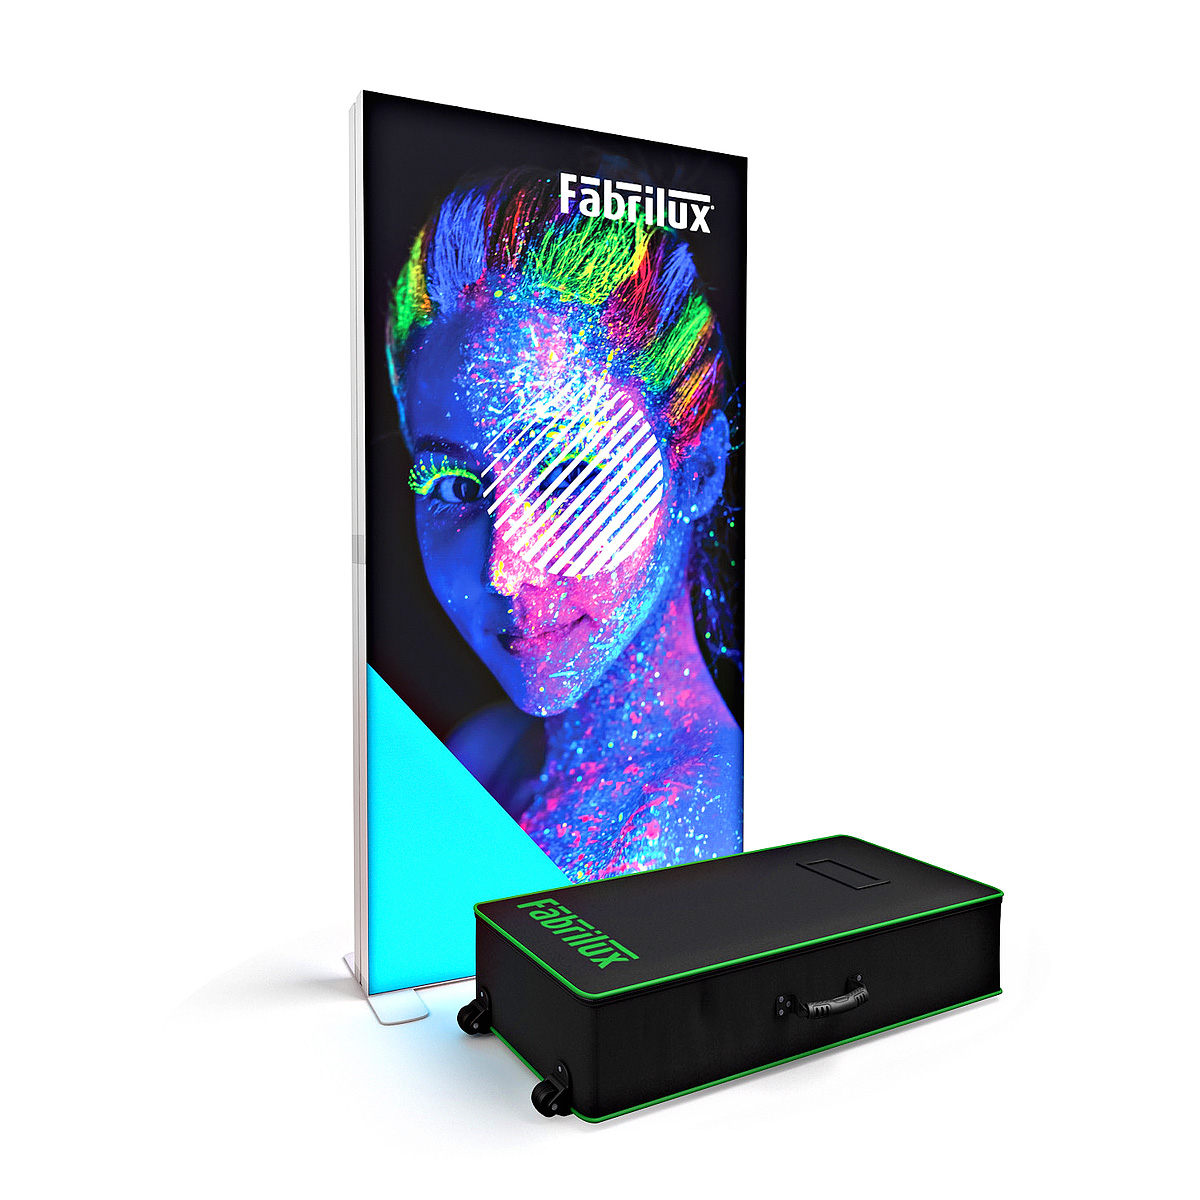 FABRILUX LED Lightbox Backlit Fabric Exhibition Display 1000 X 2000mm